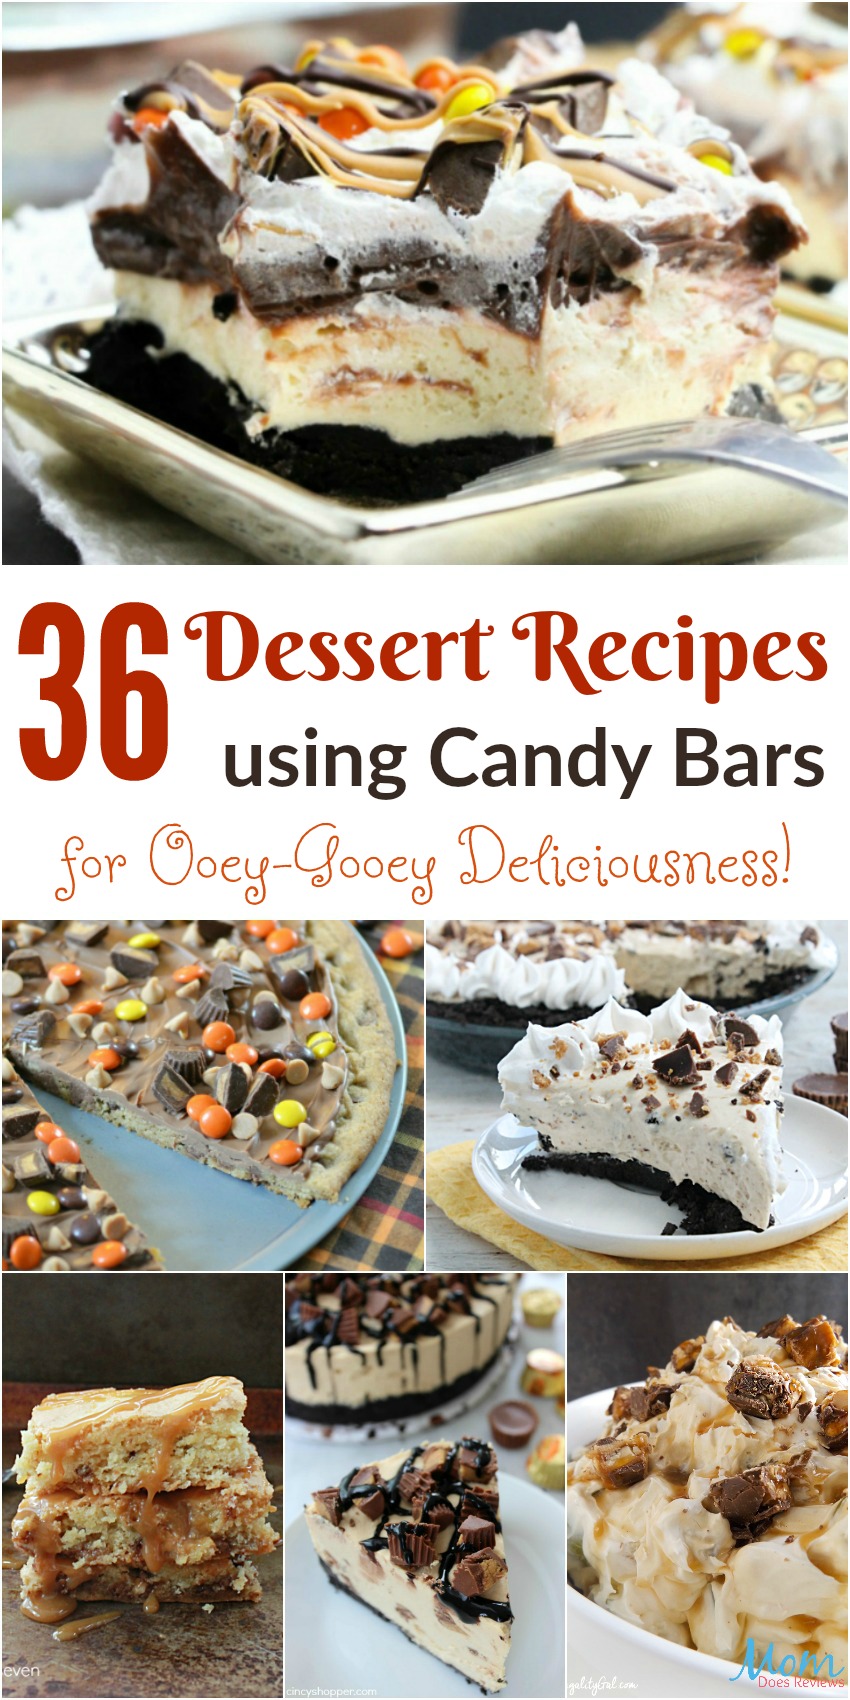 36 Dessert Recipes using Candy Bars for Ooey-Gooey Deliciousness!